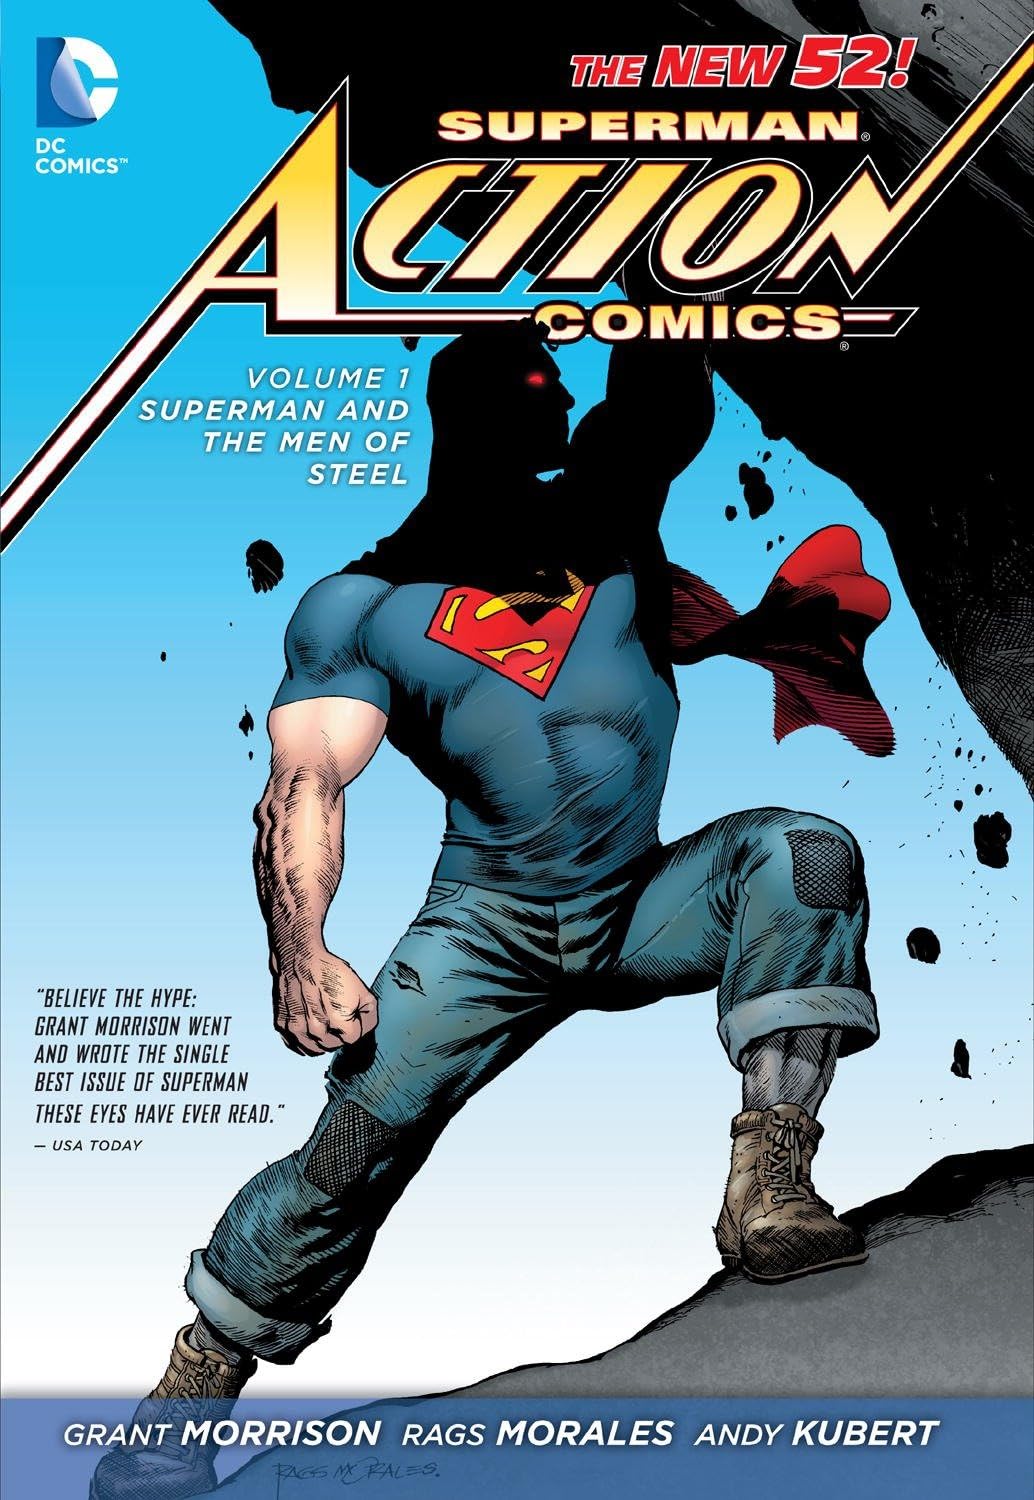 Cover image of Superman: Action Comics Vol. 1: Superman and the Men of Steel (The New 52)